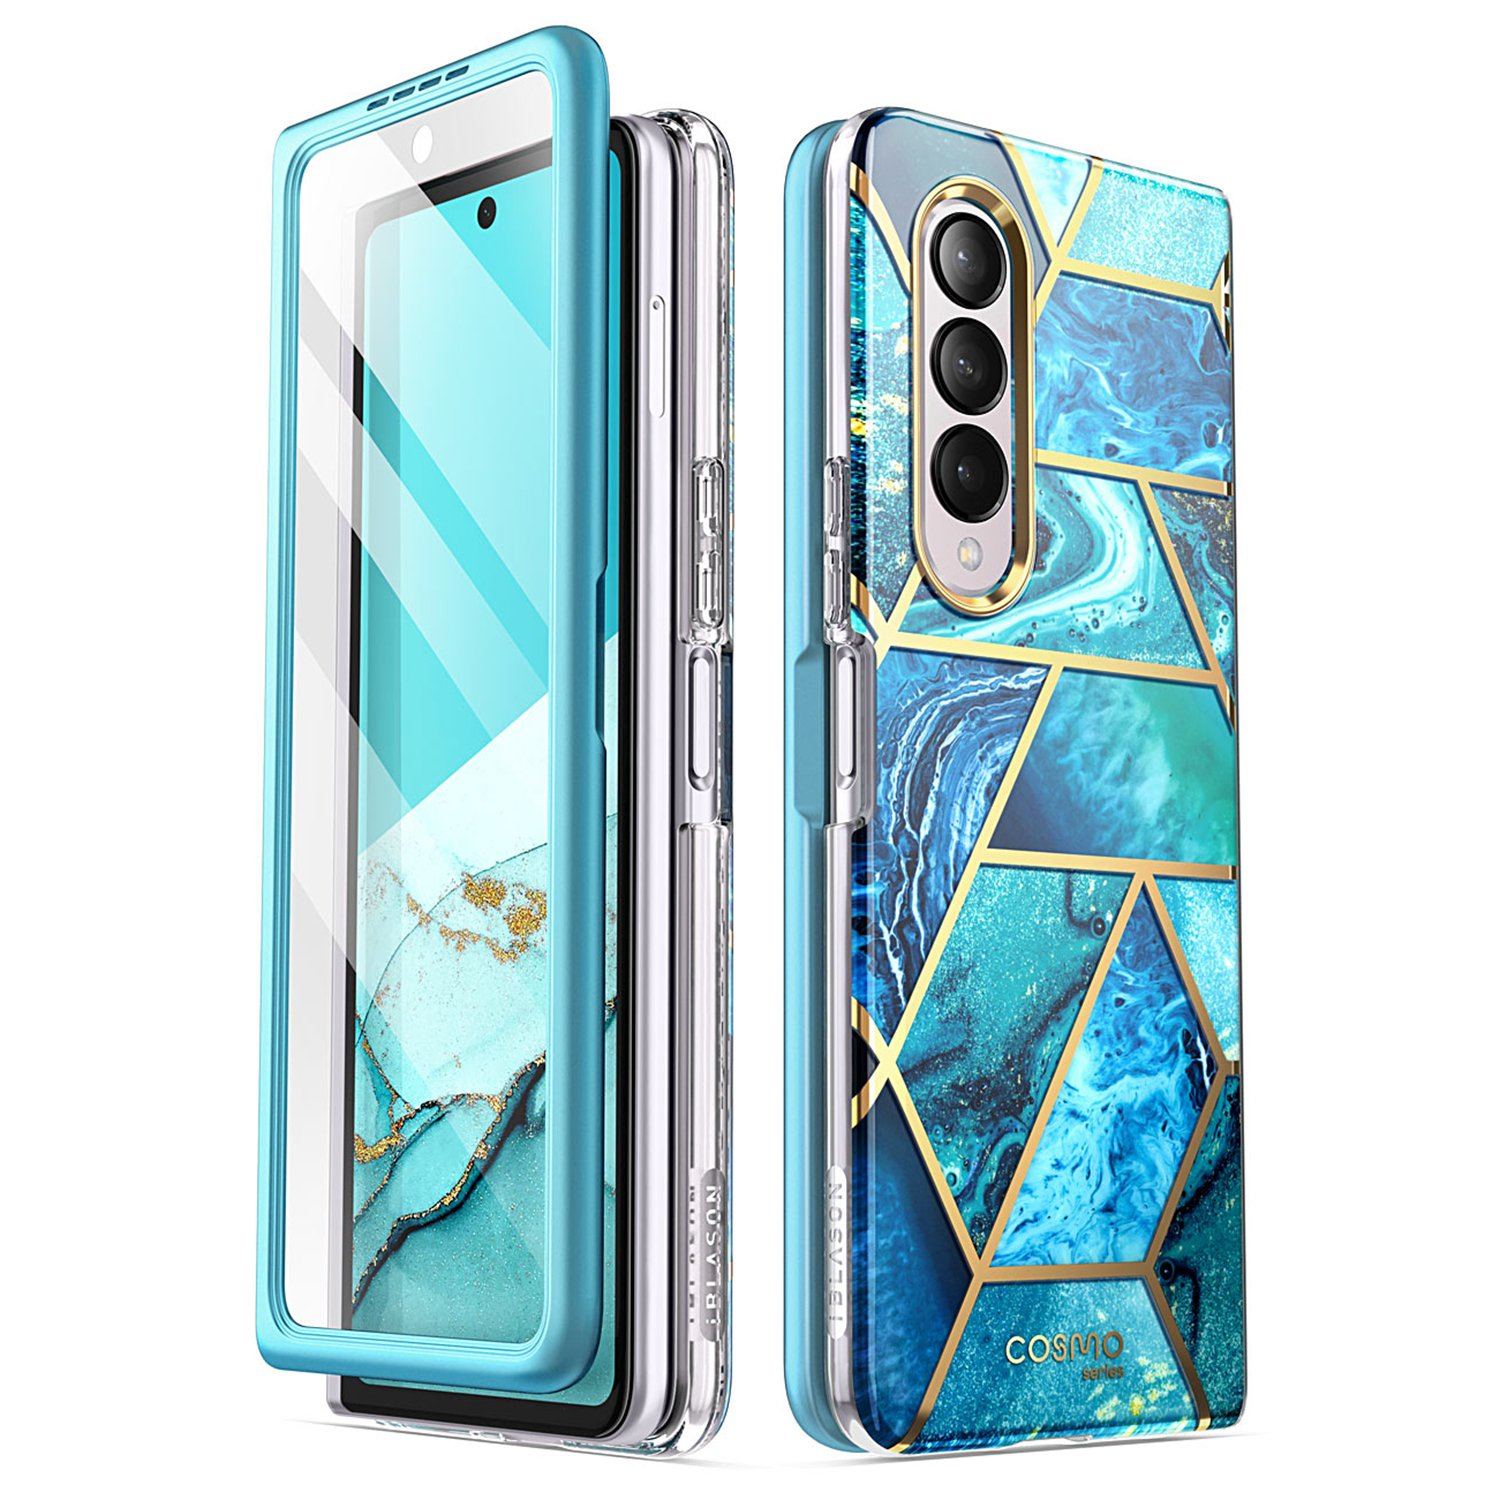 i-Blason Cosmo Series Slim Stylish Protective Bumper Case for Samsung Galaxy Z Fold3 5G (2021)(Without Screen Protector) Default i-Blason Ocean 